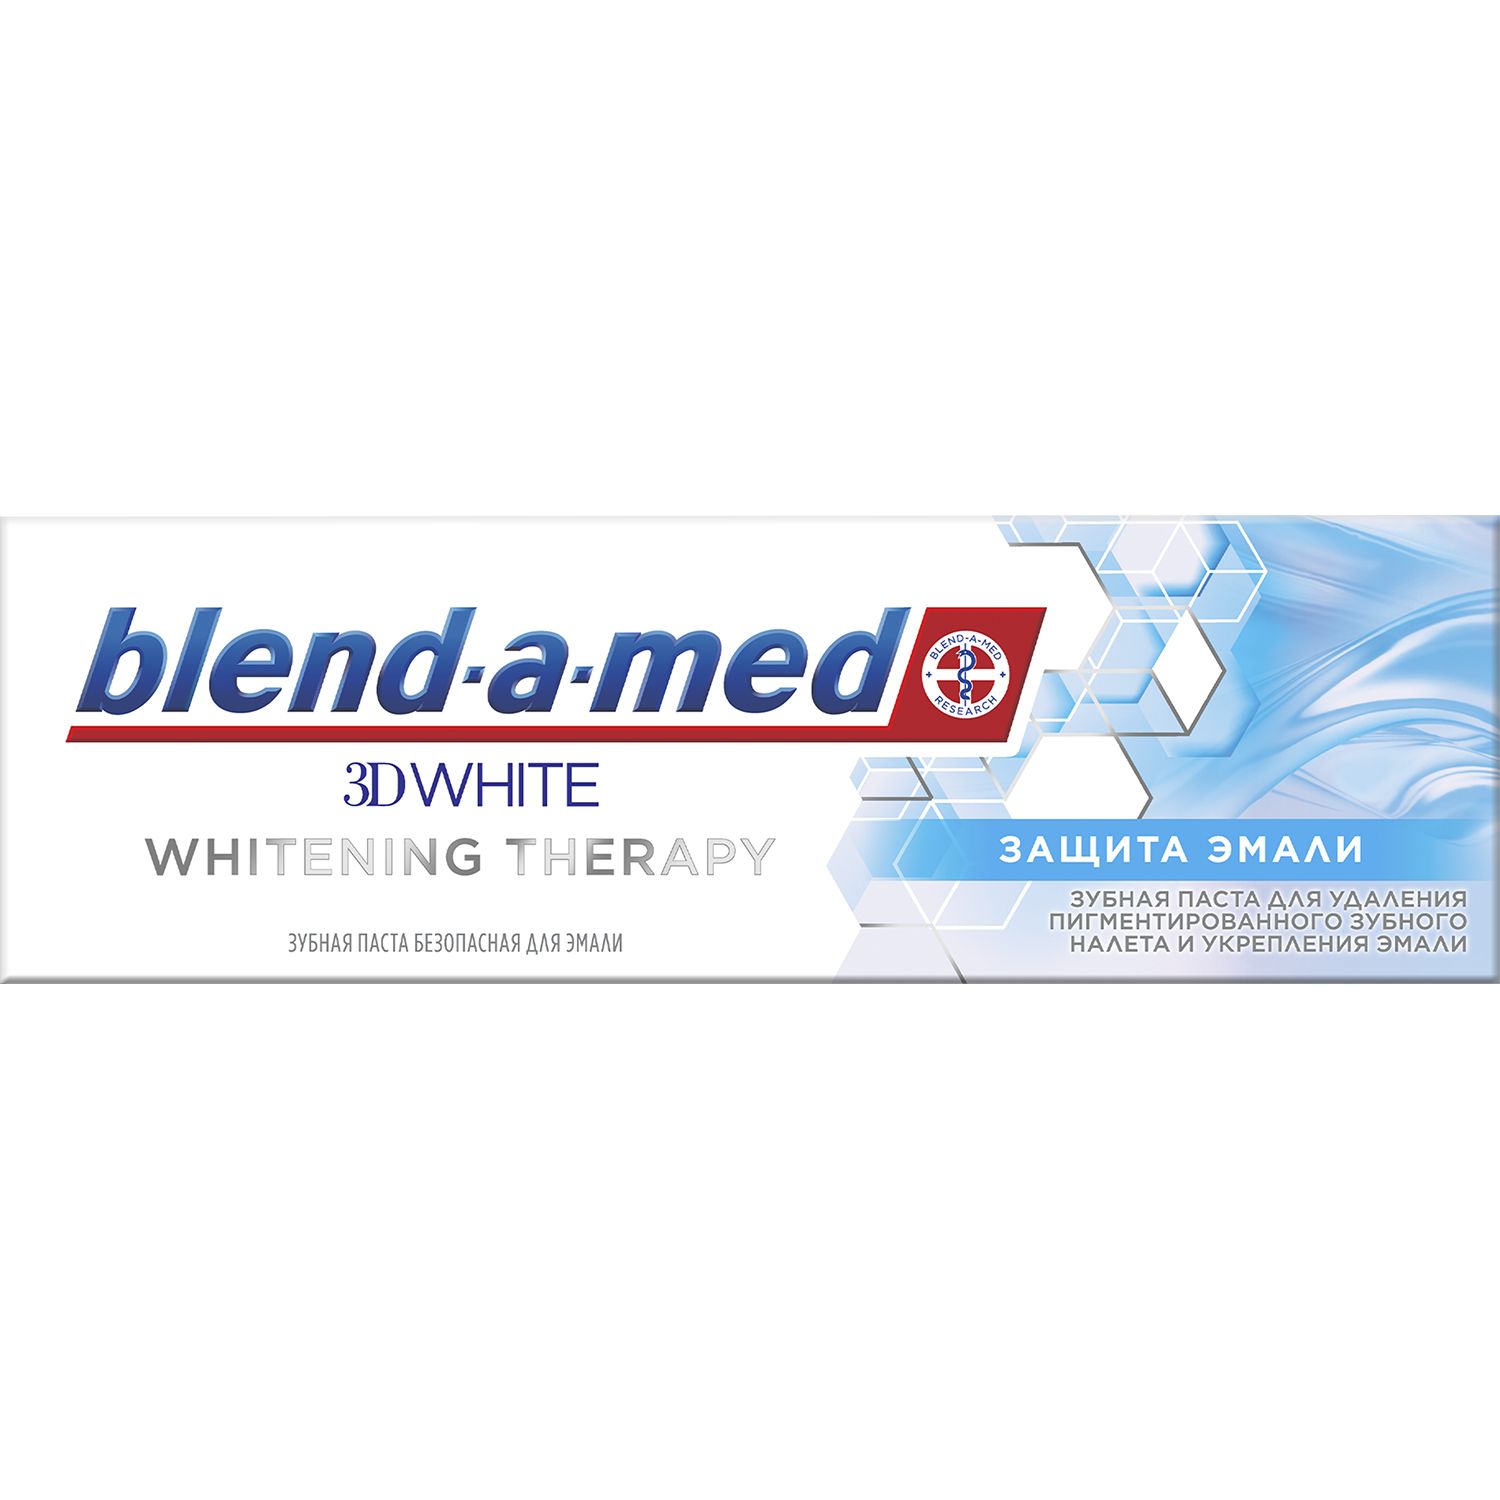 Зубна Паста Blend-a-med 3D White Whitening Therapy Захист зубної емалі 75 мл - фото 3